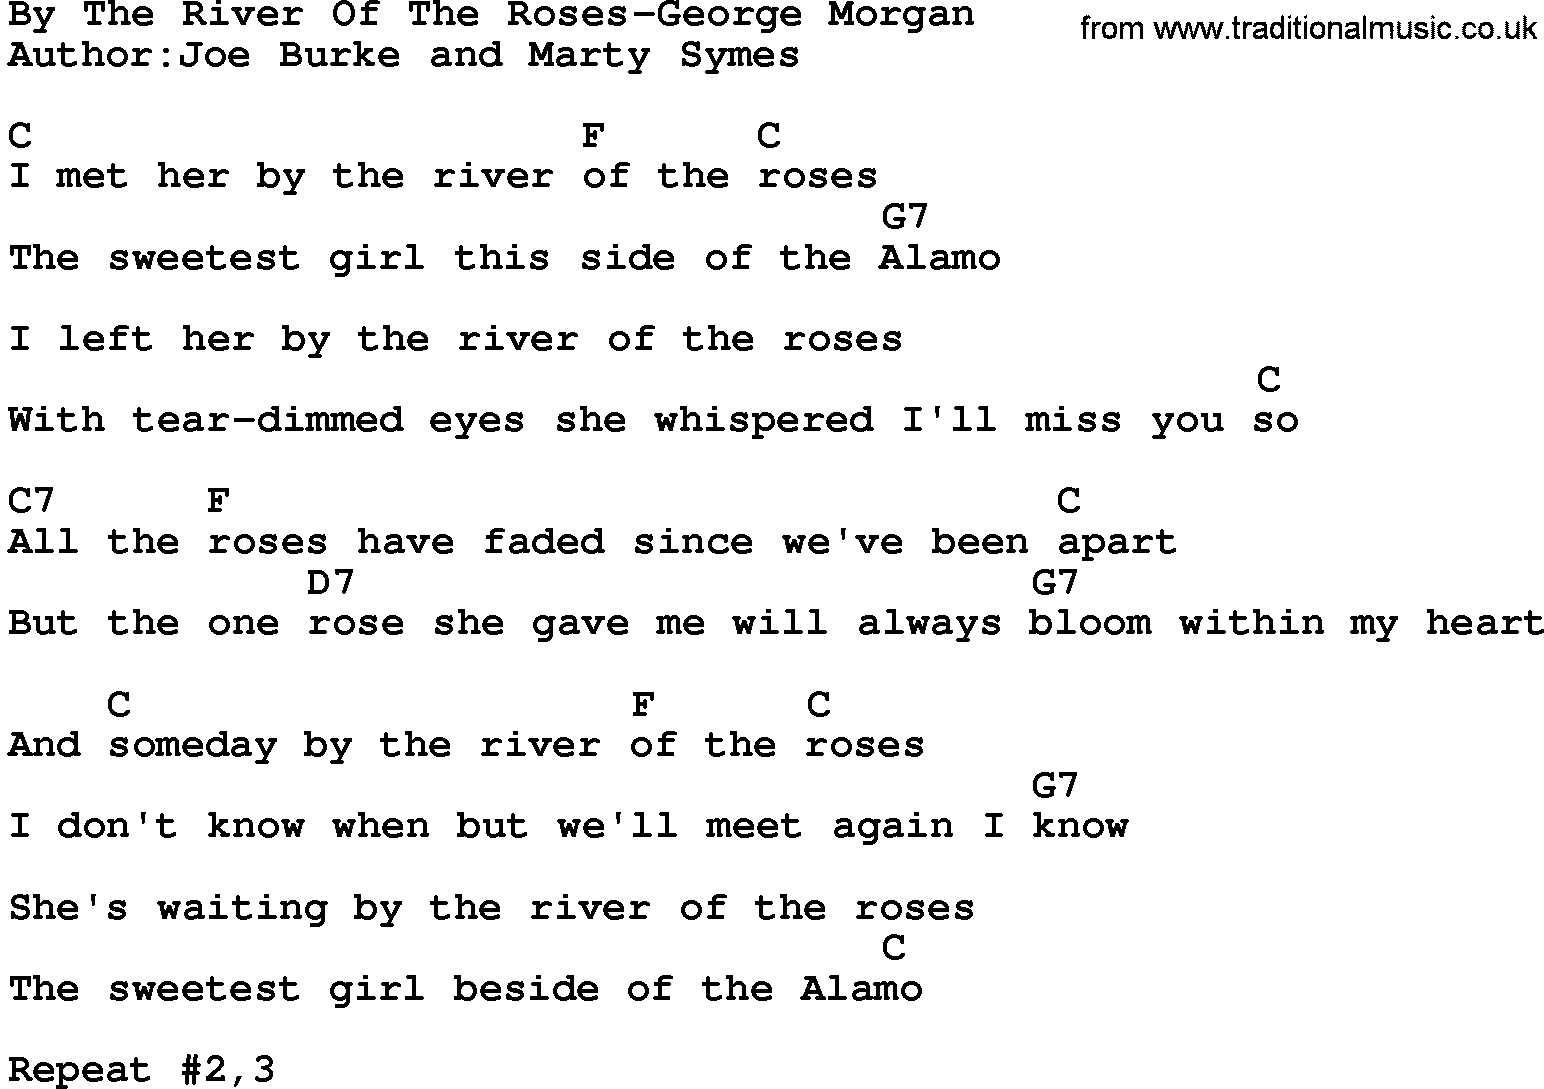 Country music song: By The River Of The Roses-George Morgan lyrics and chords